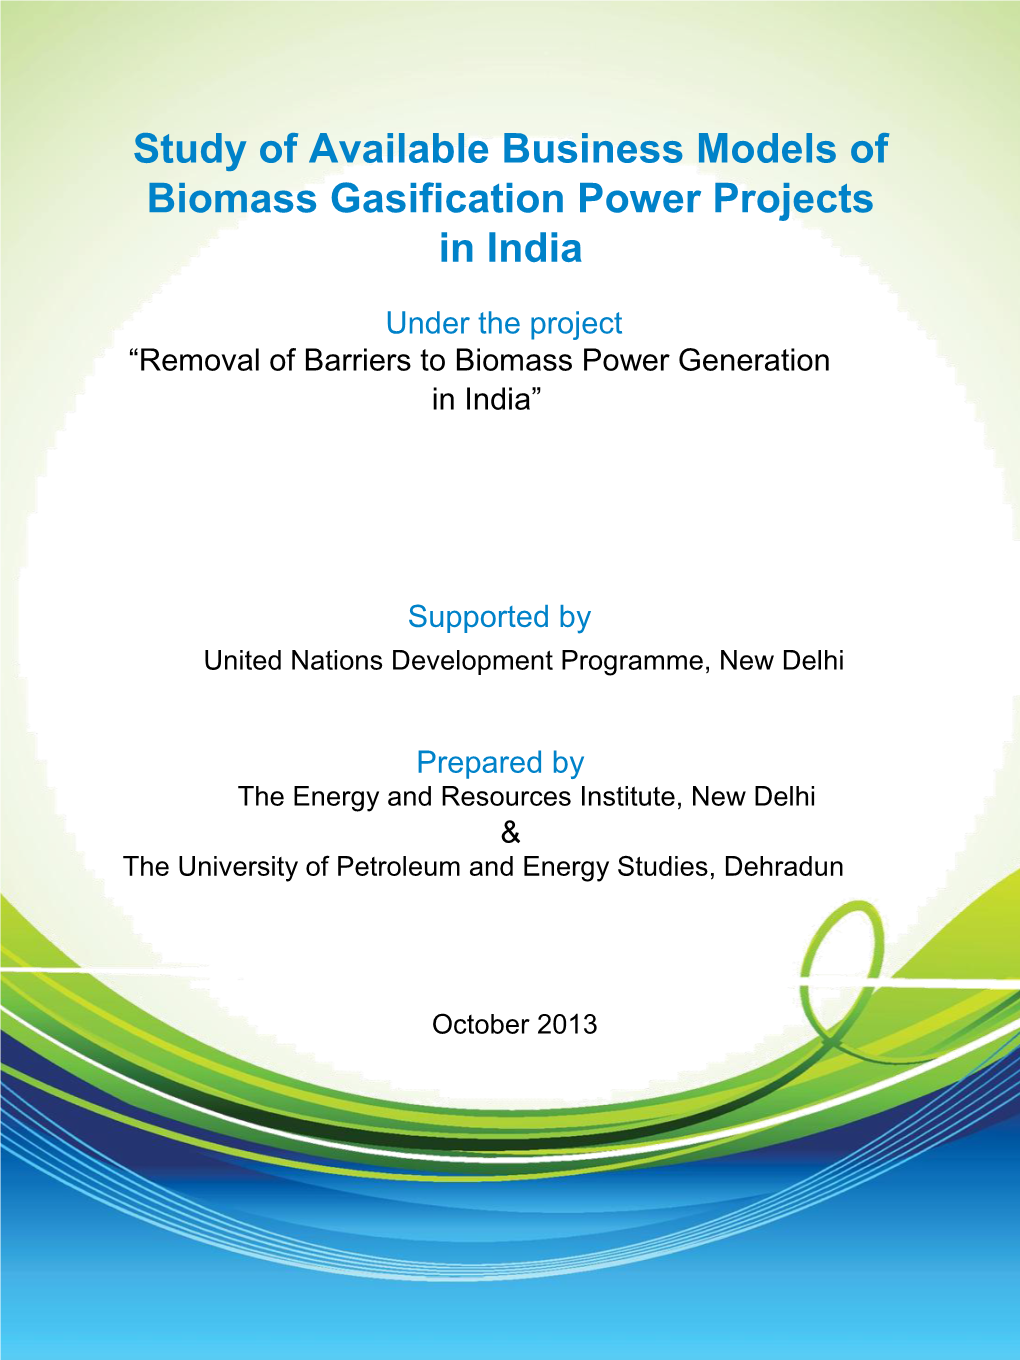 Study of Available Business Models of Biomass Gasification Power Projects in India